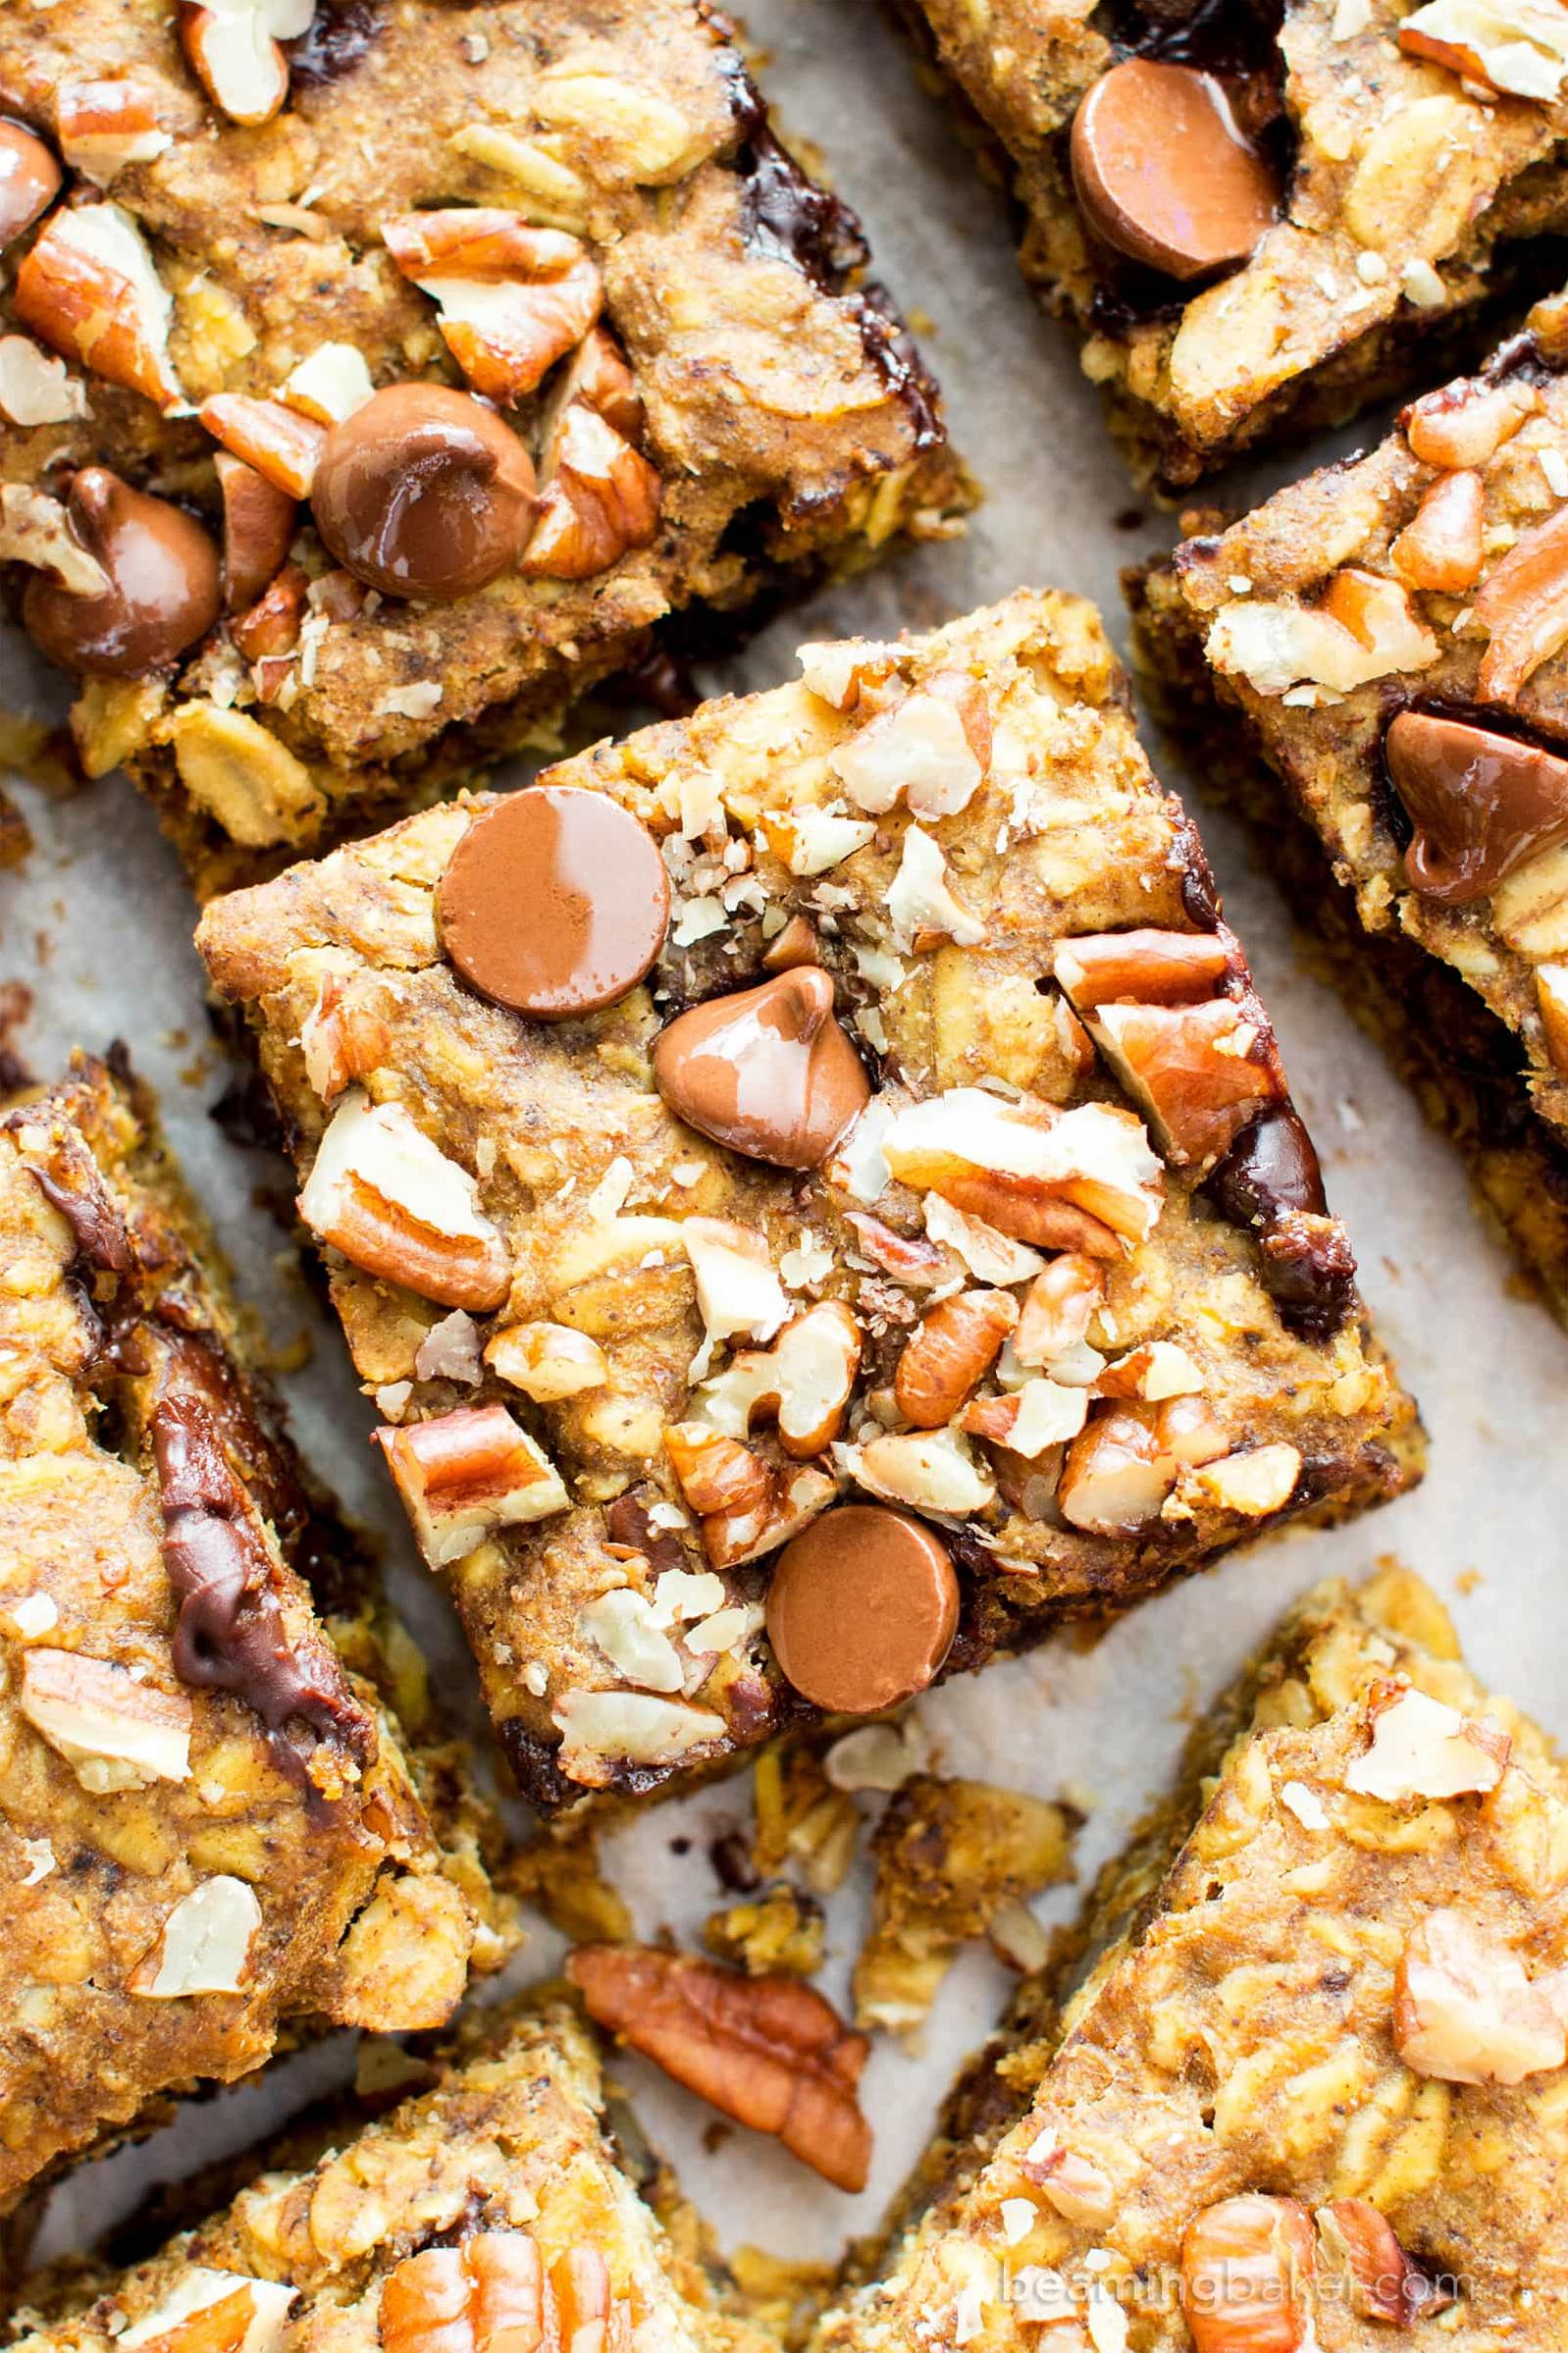  Say goodbye to store-bought granola bars—these are homemade goodness